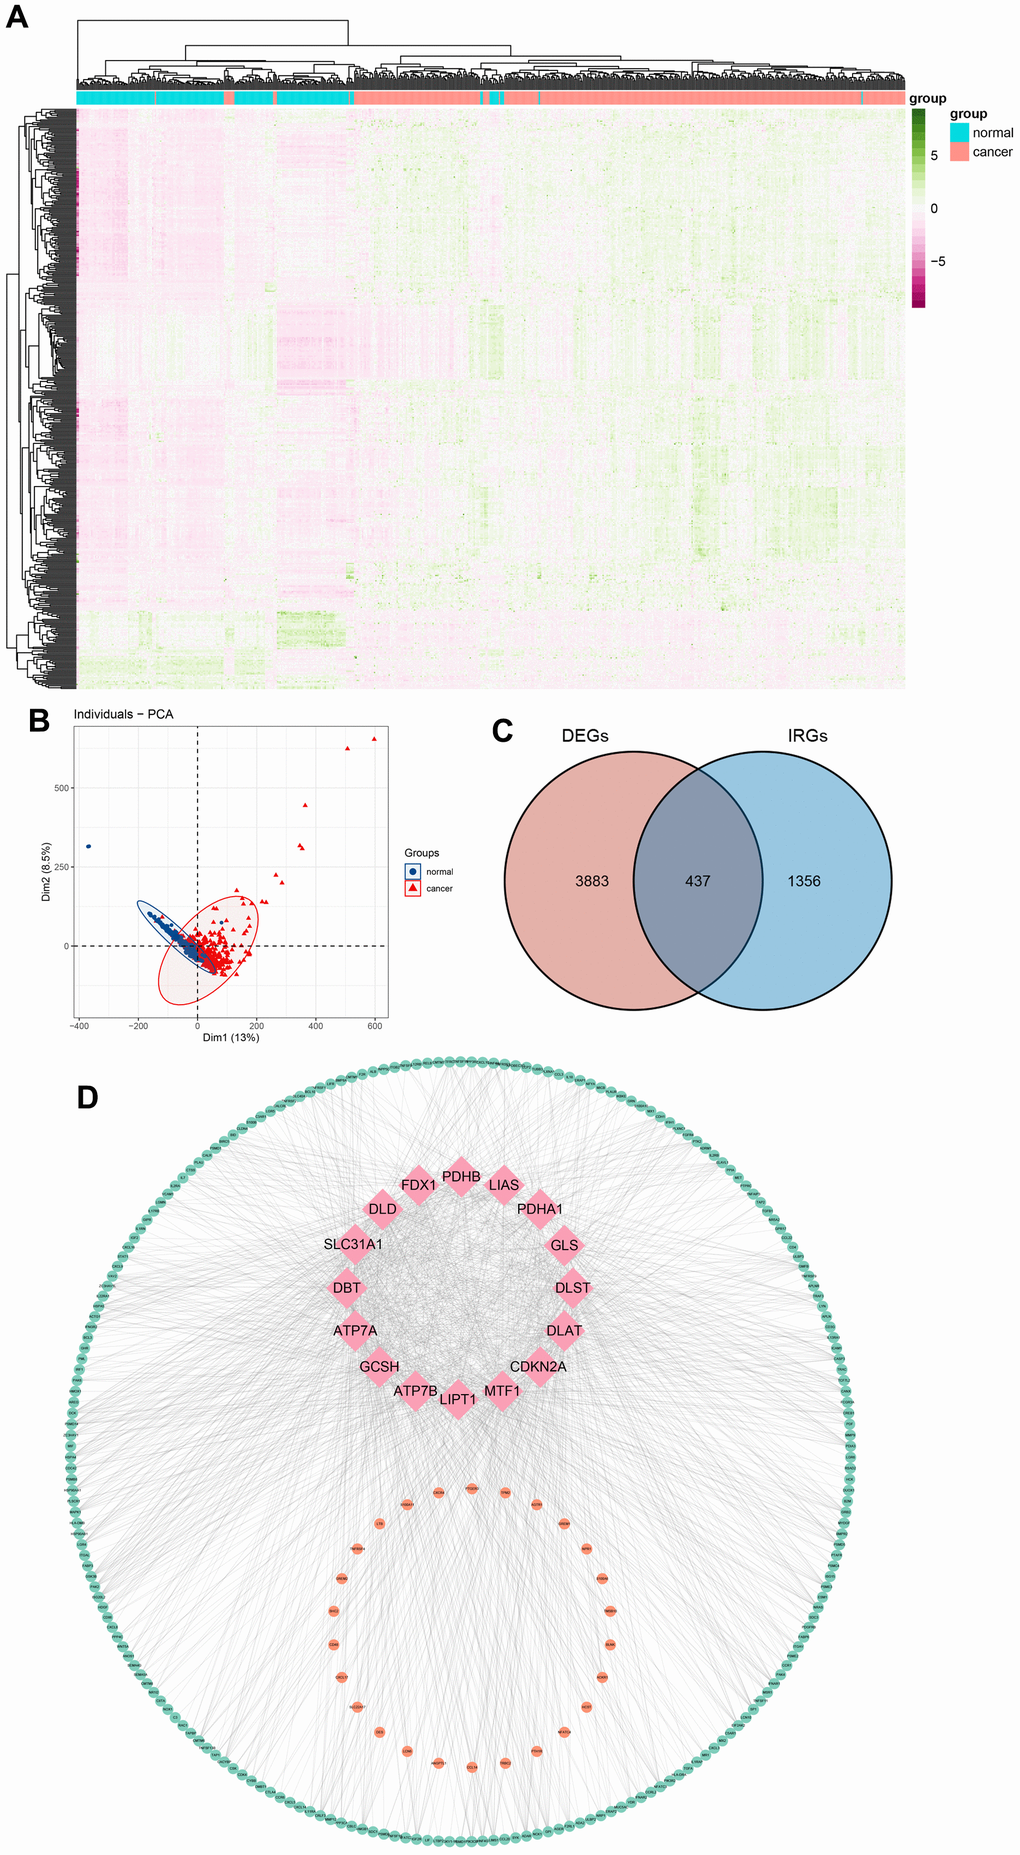 Differentially expressed cuproptosis-related immune genes (CRIGs) in gastric cancer (GC). (A) Heatmap of differentially expressed genes in GC. (B) Results of PCA analysis between GC and normal gastric tissues. (C) Venn diagram of differentially expressed genes and immune-related genes. (D) Correlation between immune-related genes and cuproptosis-related genes (pink, orange, and green represent cuproptosis-related genes, IRGs positively related to the cuproptosis and IRGs negatively related to the cuproptosis).